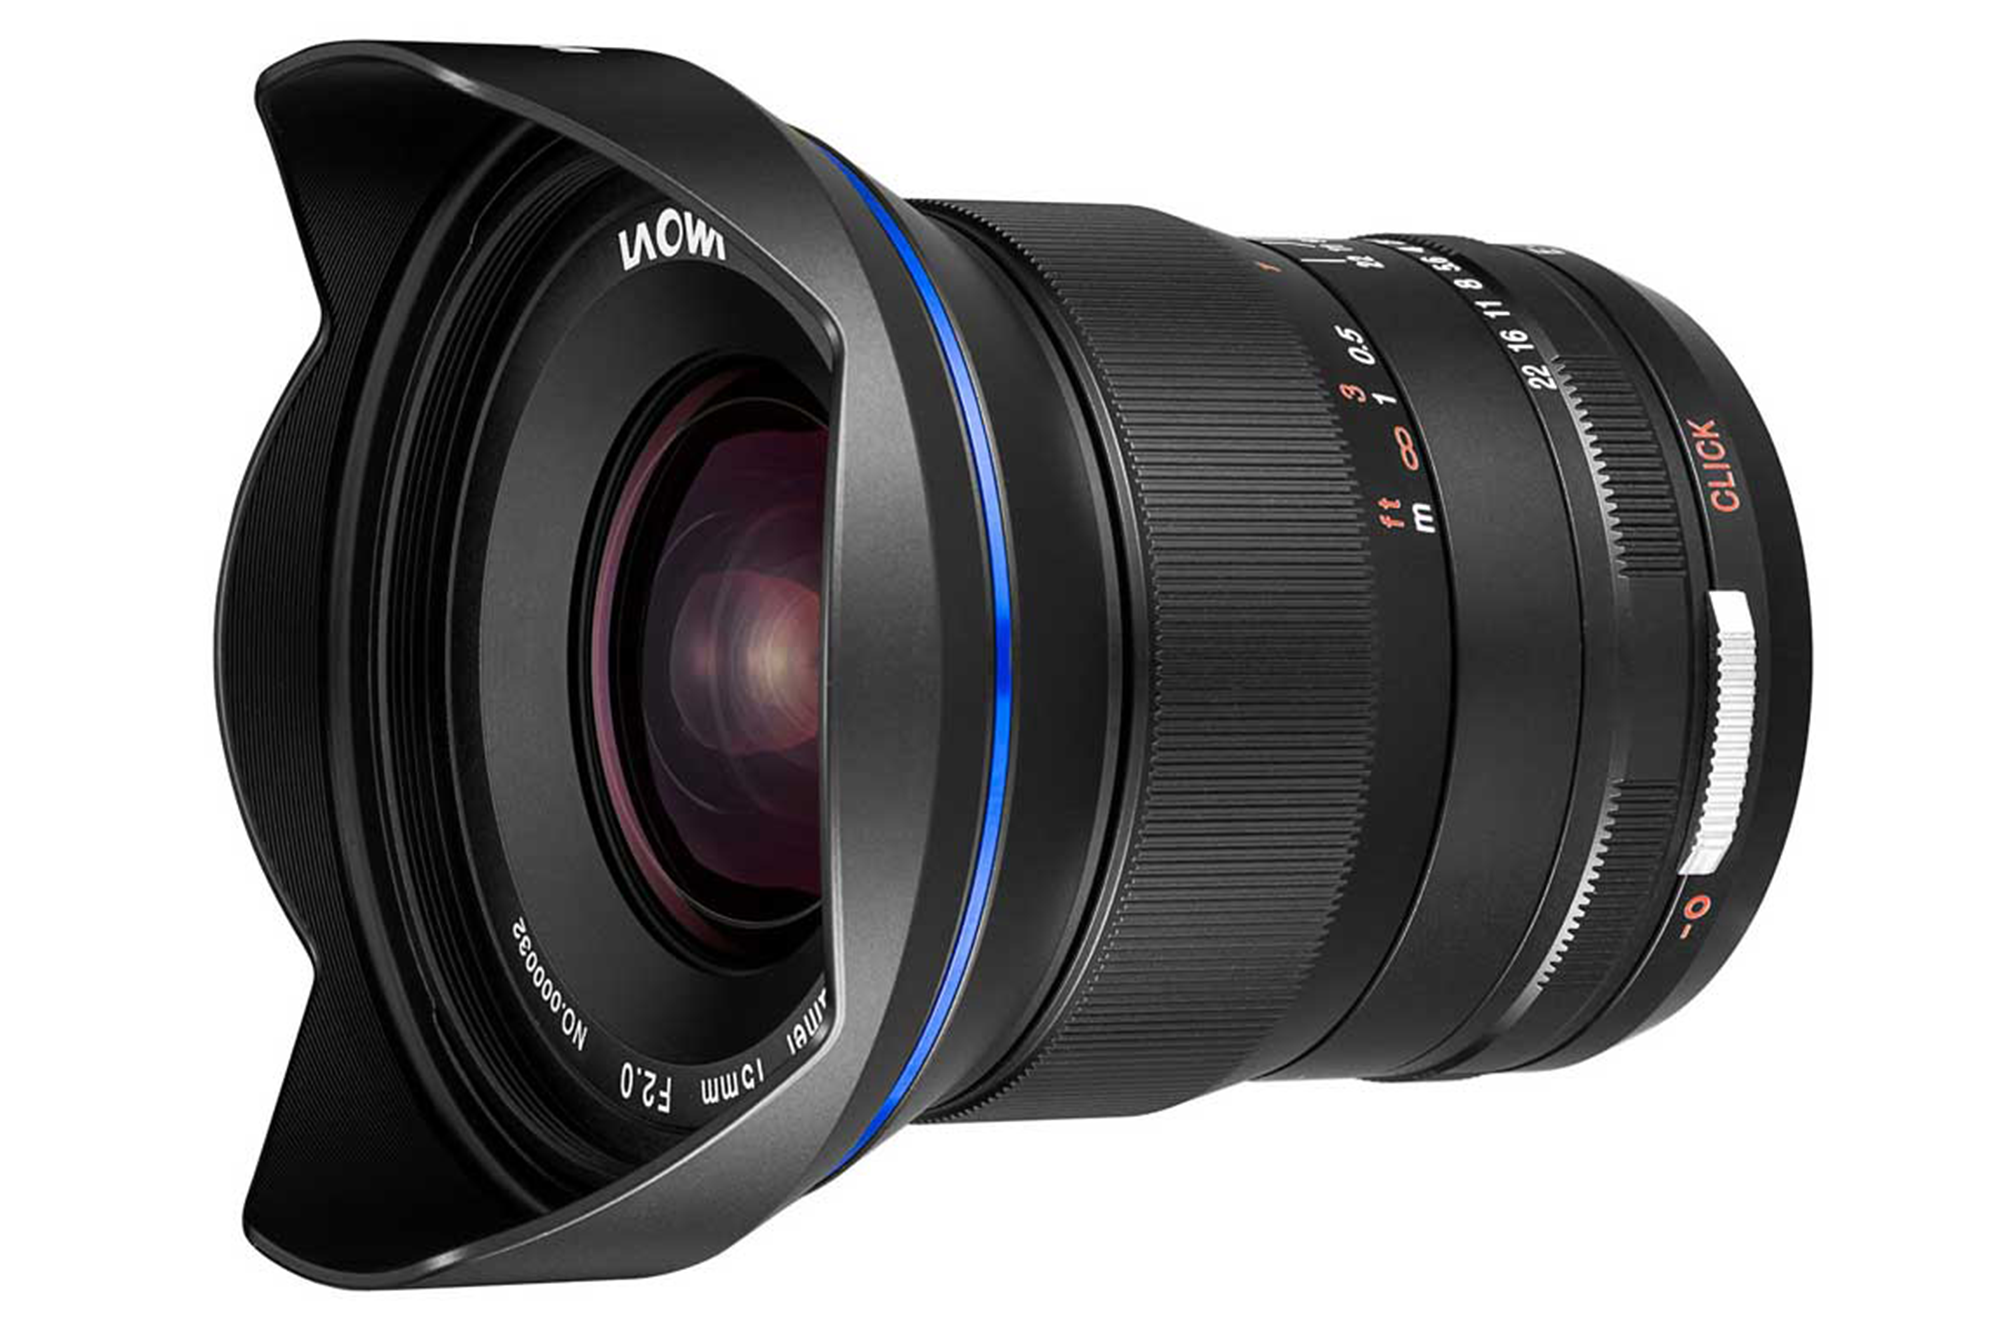 Laowa 15mm f/2 FE Zero-D Lens Now Available For Pre-Order